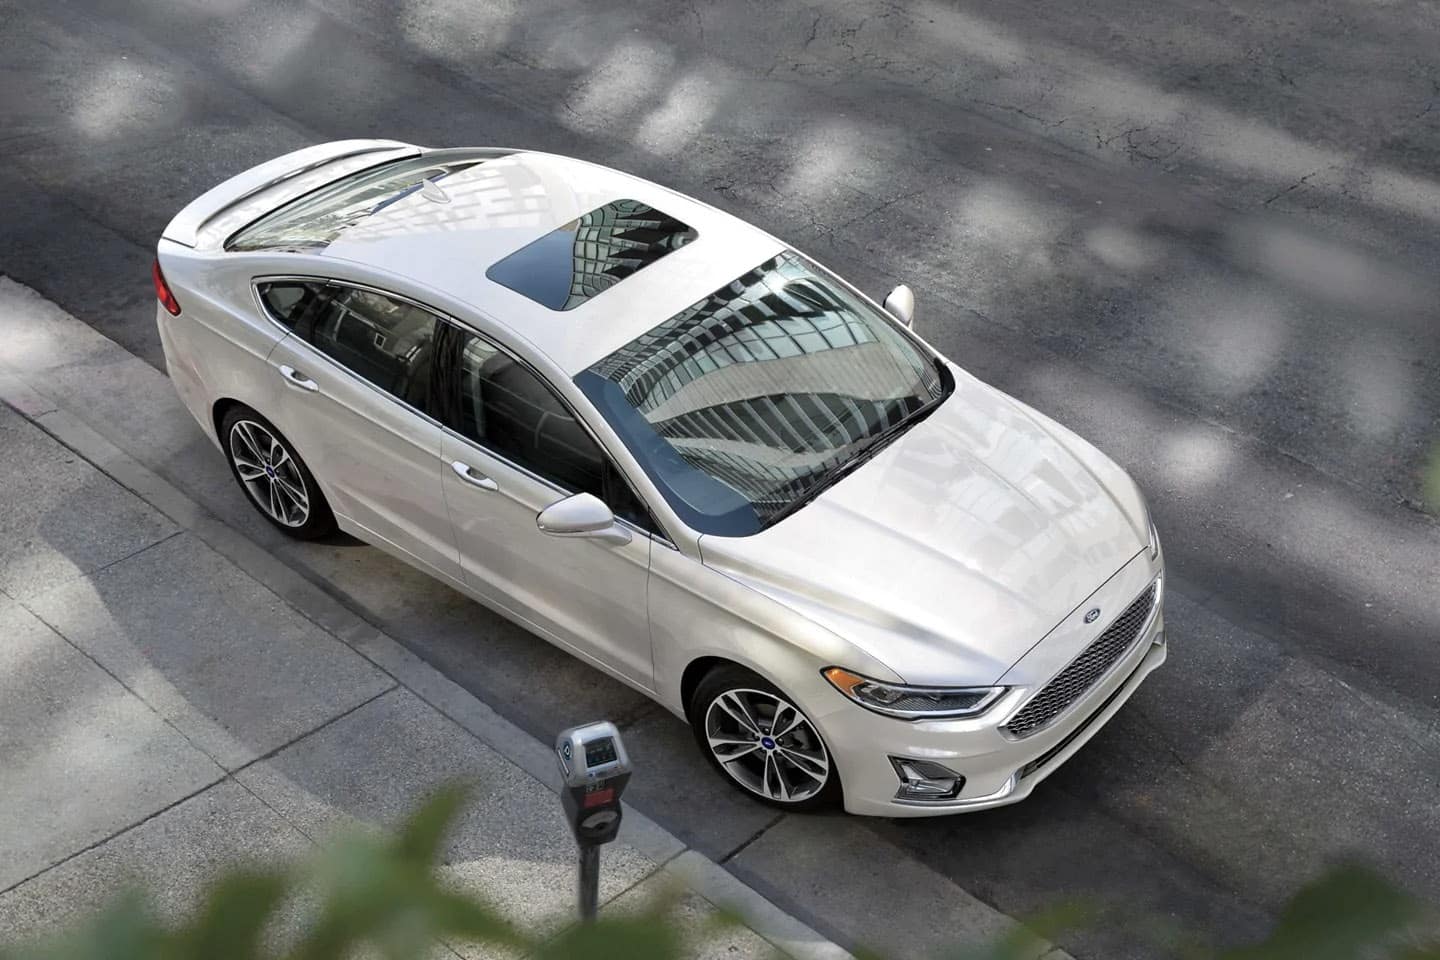 2019 Ford Fusion MPG Ratings | River View Ford